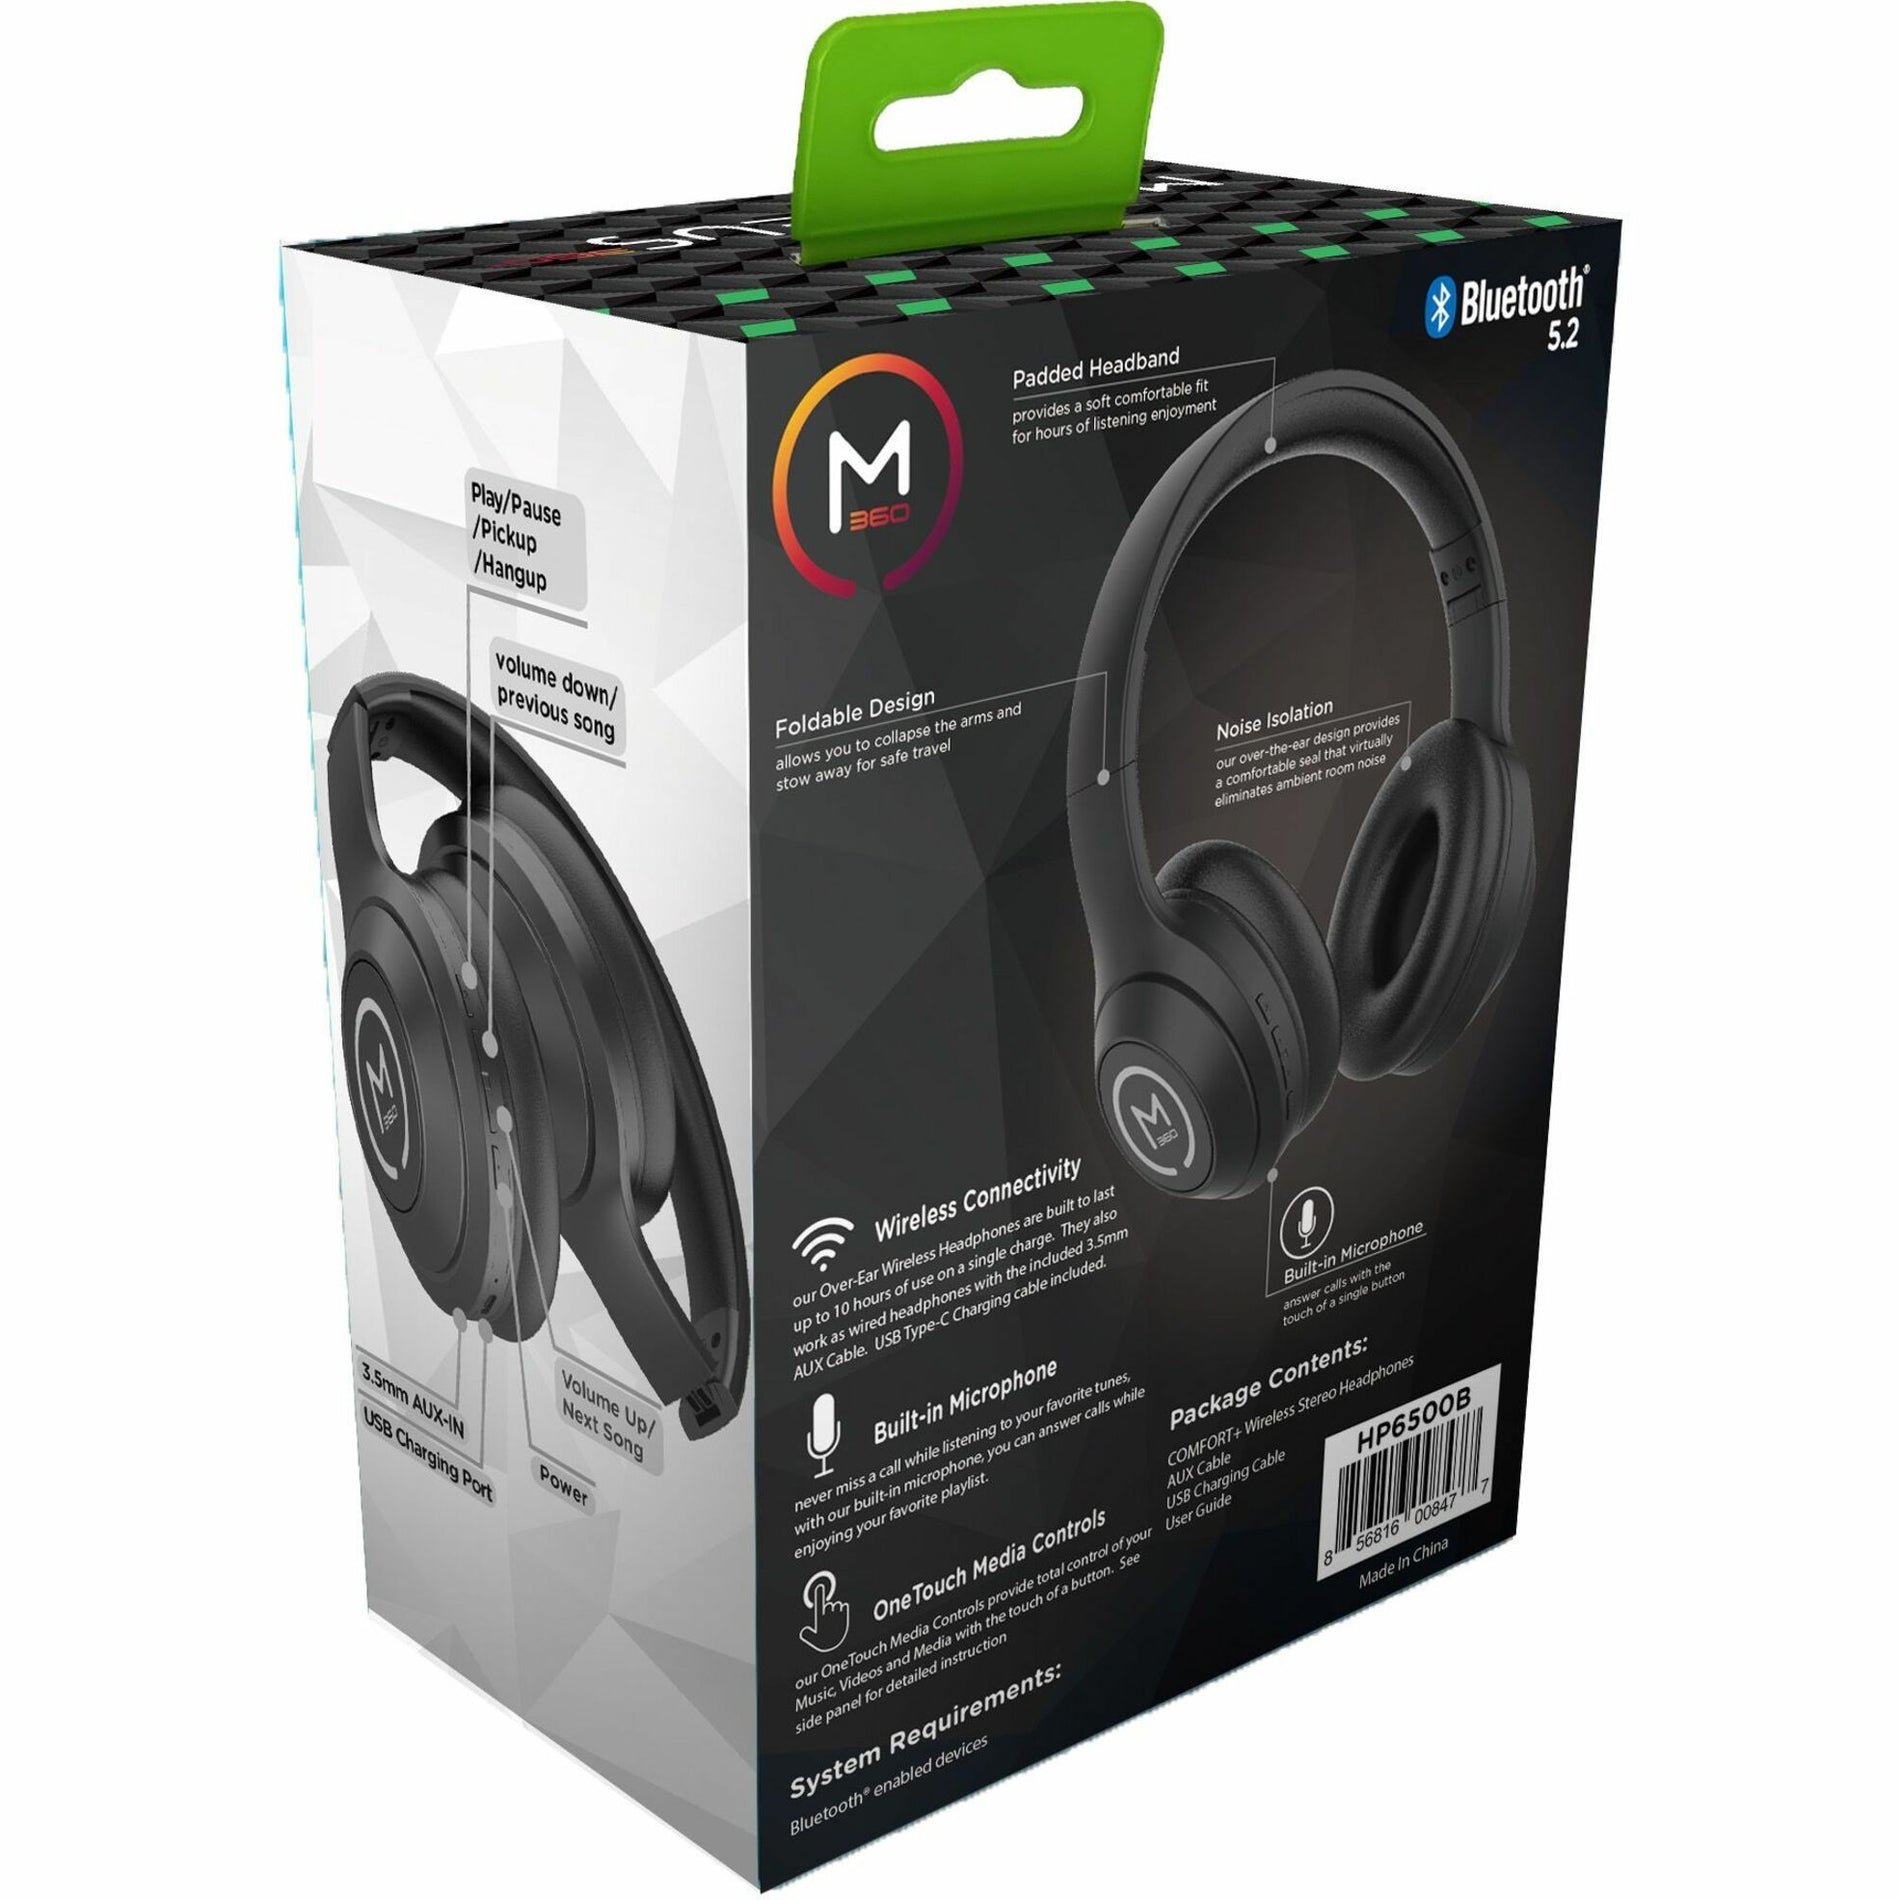 Morpheus 360 HP6500B COMFORT+ Wireless Stereo Headphone, Over-the-head, Over-the-ear, Touch Control, Foldable, Black